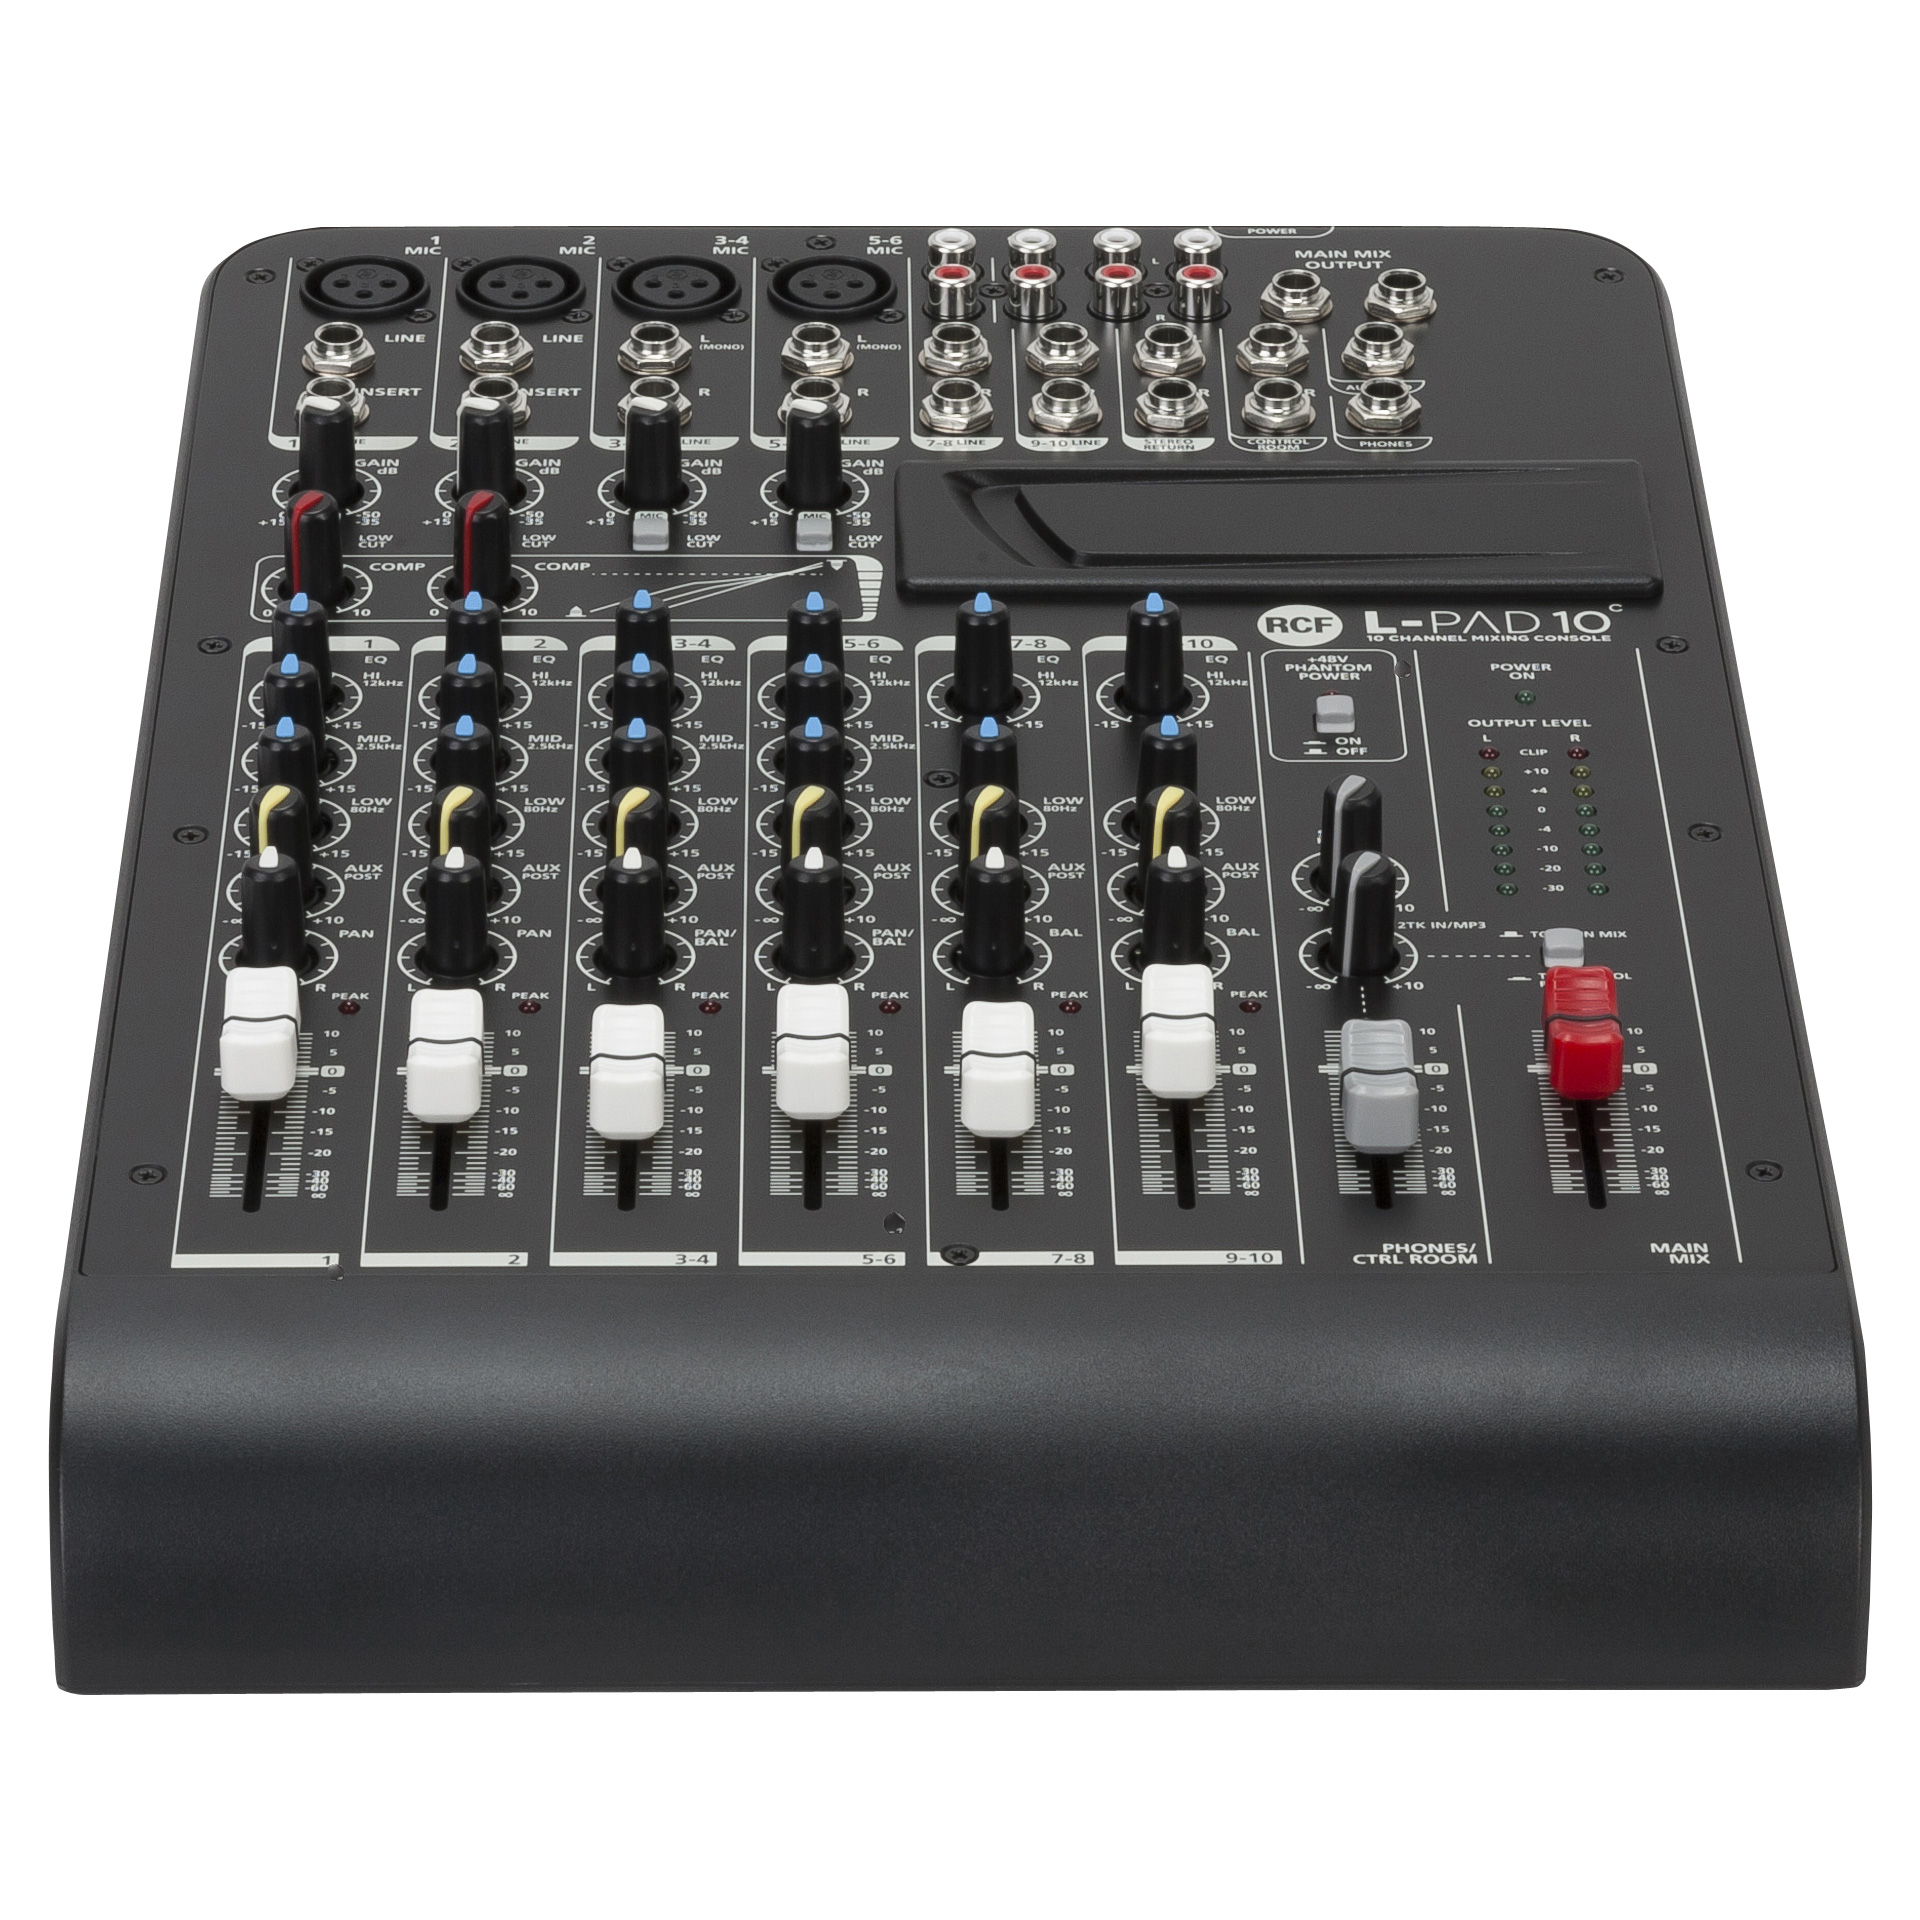 L-PAD 10C 10 CHANNEL MIXING CONSOLE